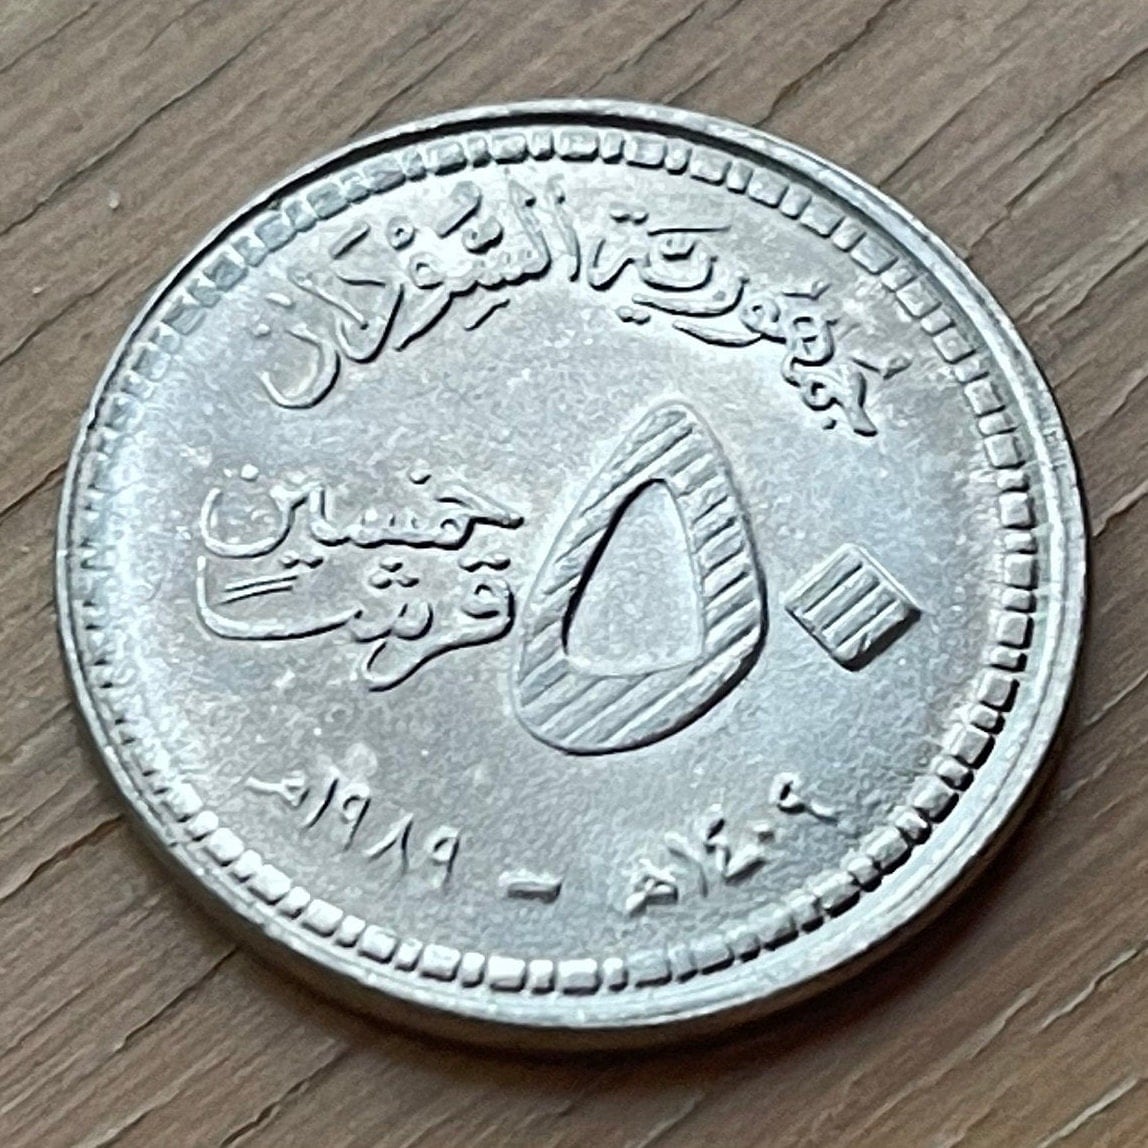 Bank of Sudan 50 Qirsh Sudan Authentic Coin Money for Jewelry and Craft Making (Islamic Banking)